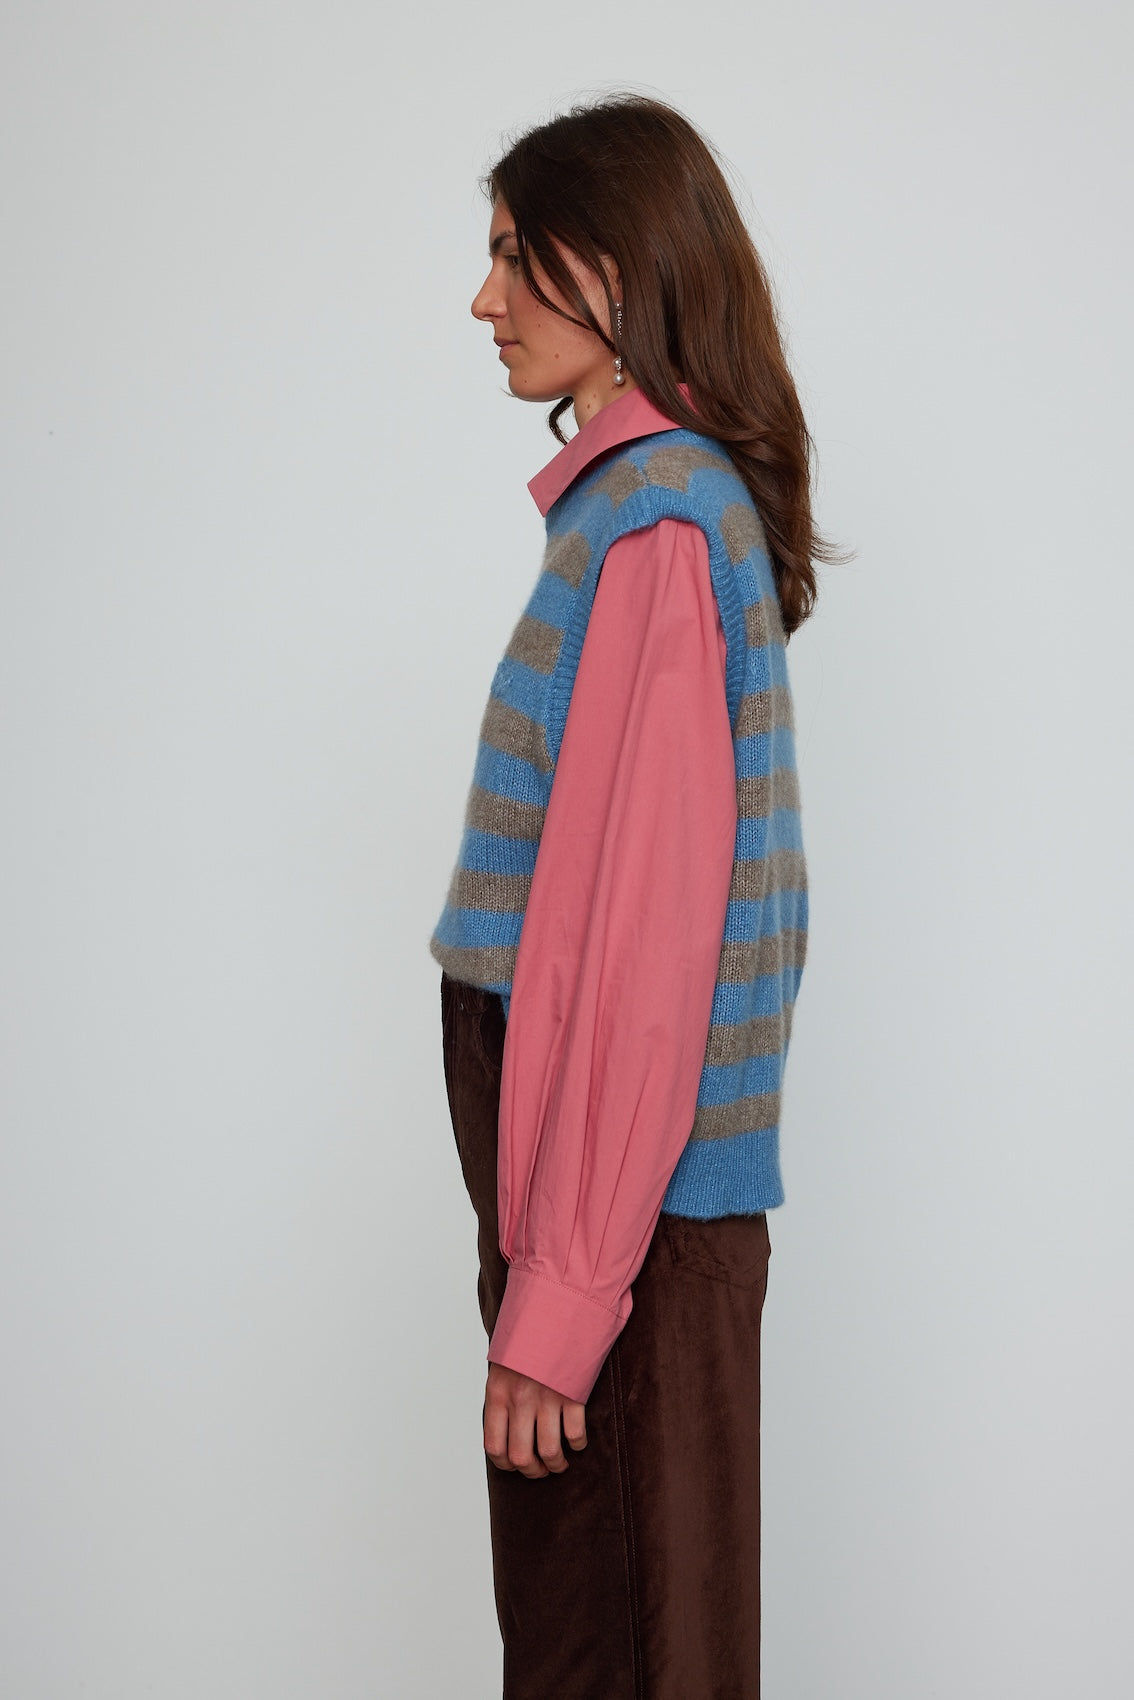 Caro Editions Ultra-soft, light-weight, oversized vest made from cashmere silk yarn. It is a versatile piece to carry you through the changing seasons. Wear it over a silk shirt or t-shirt for extra warmth. Material: 75% Cashmere, 25% Silk.